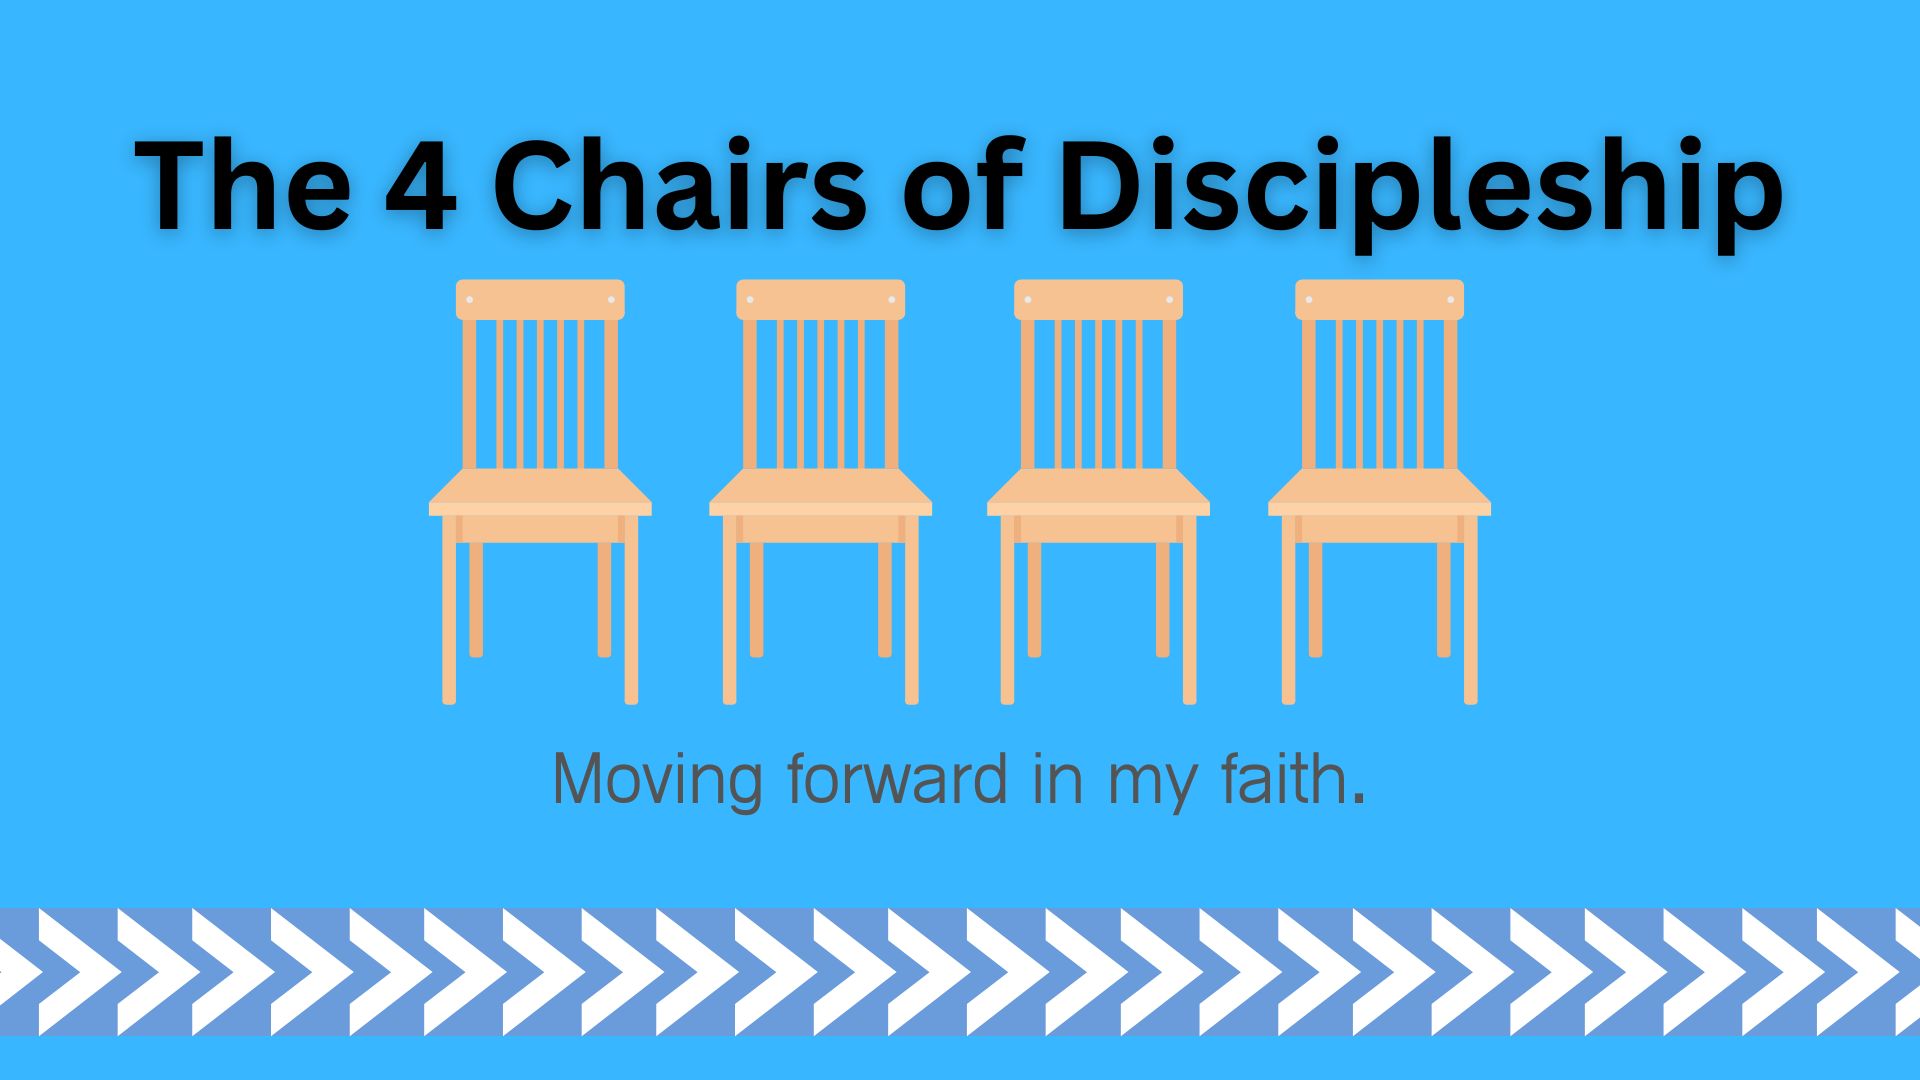 The 4 Chairs of Discipleship